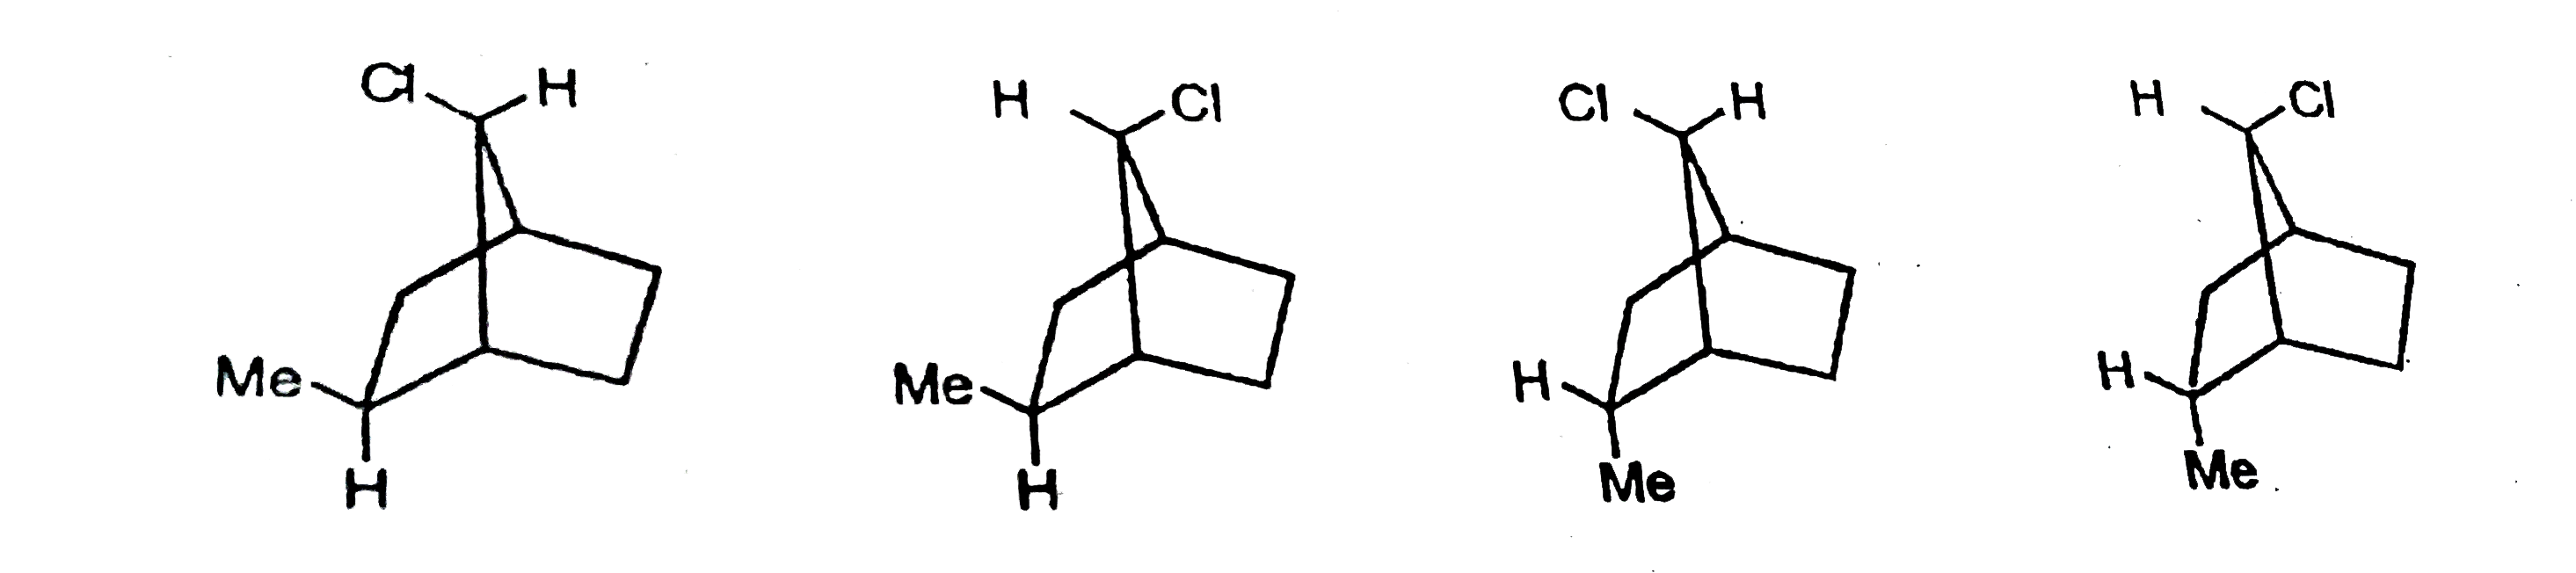 How many geometrical isomers of 2-Methyl-7-chloronobonmane are possible ?